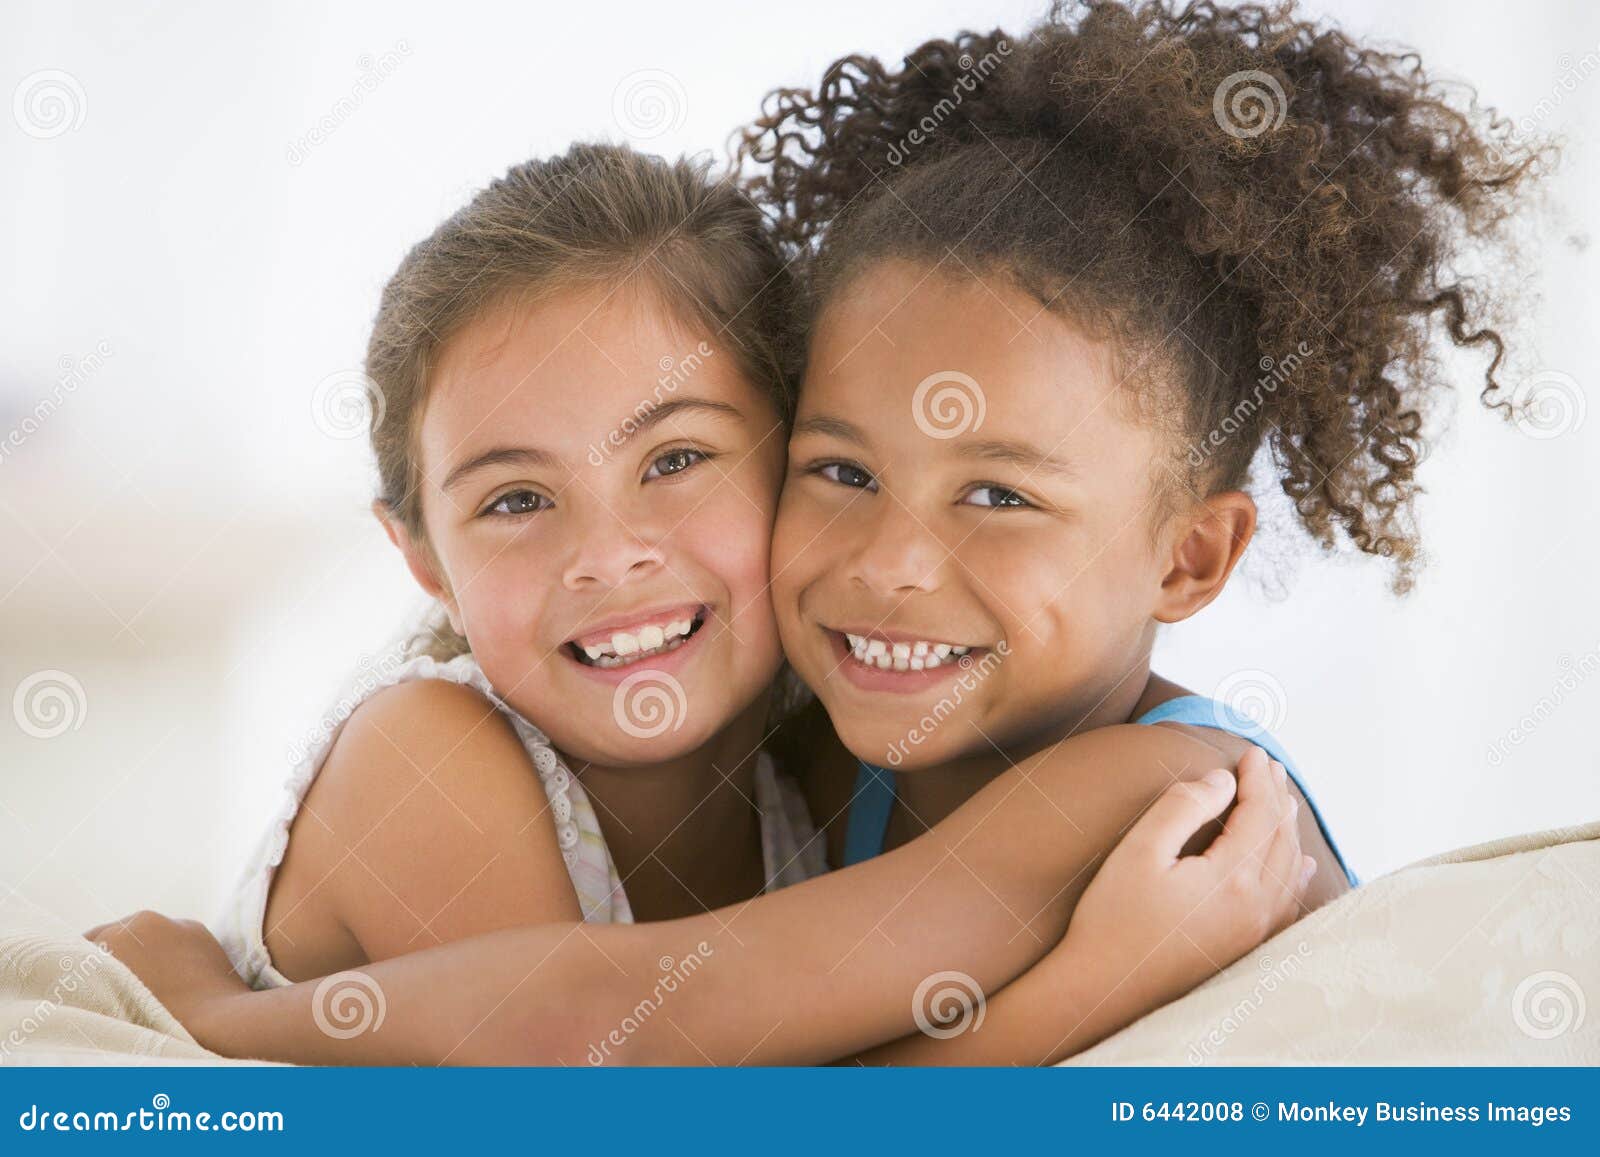 Boy Hugging With His Cat Royalty-Free Stock Photography | CartoonDealer ...